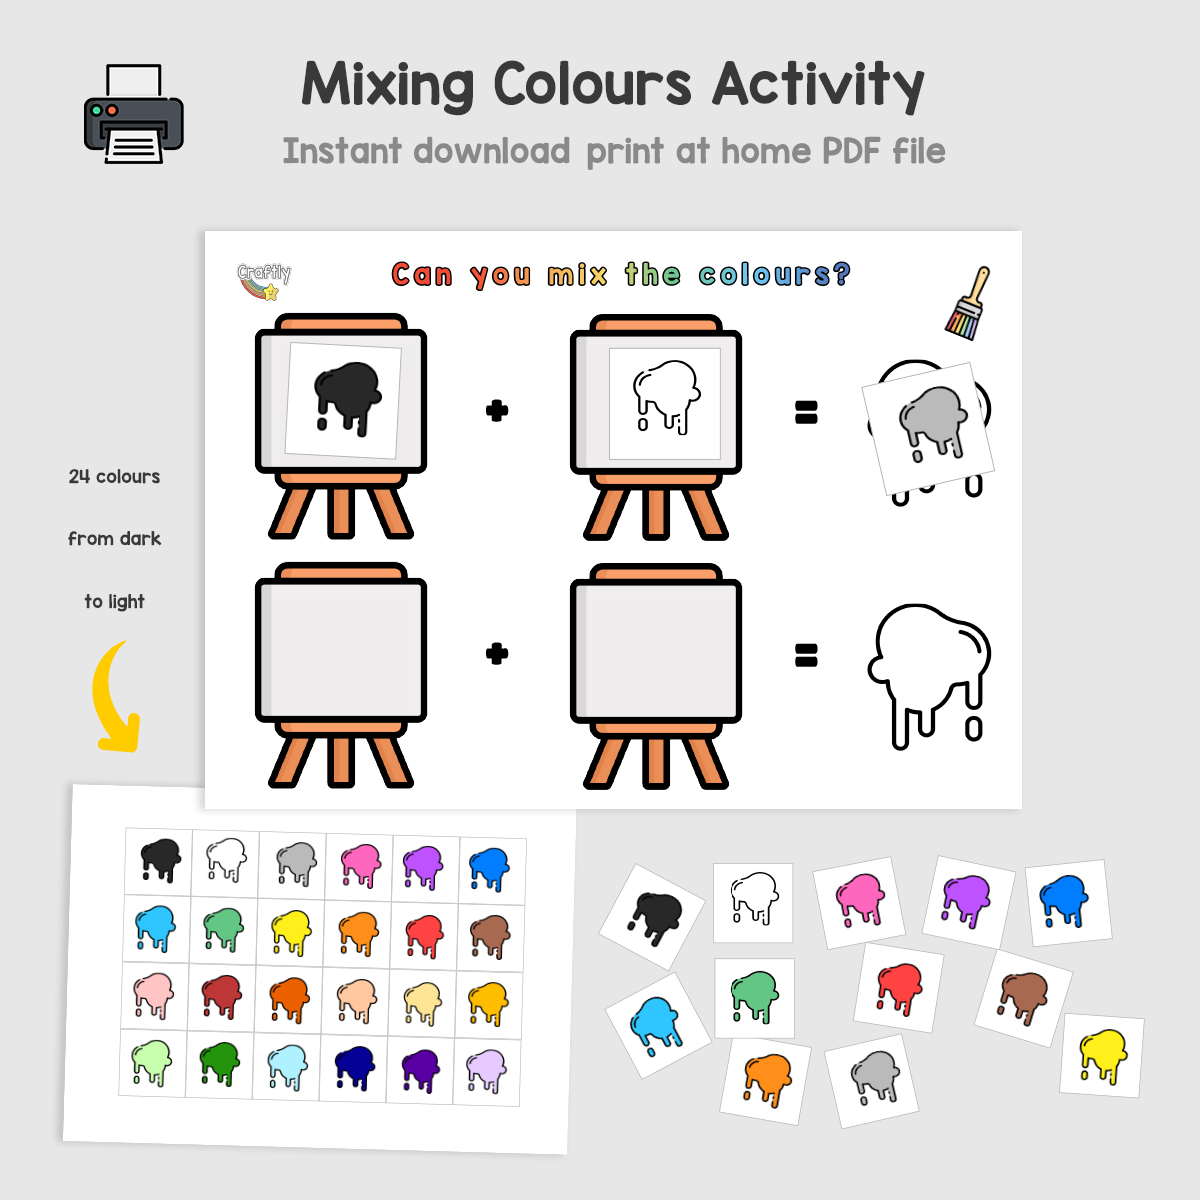 Mixing Colours Activity